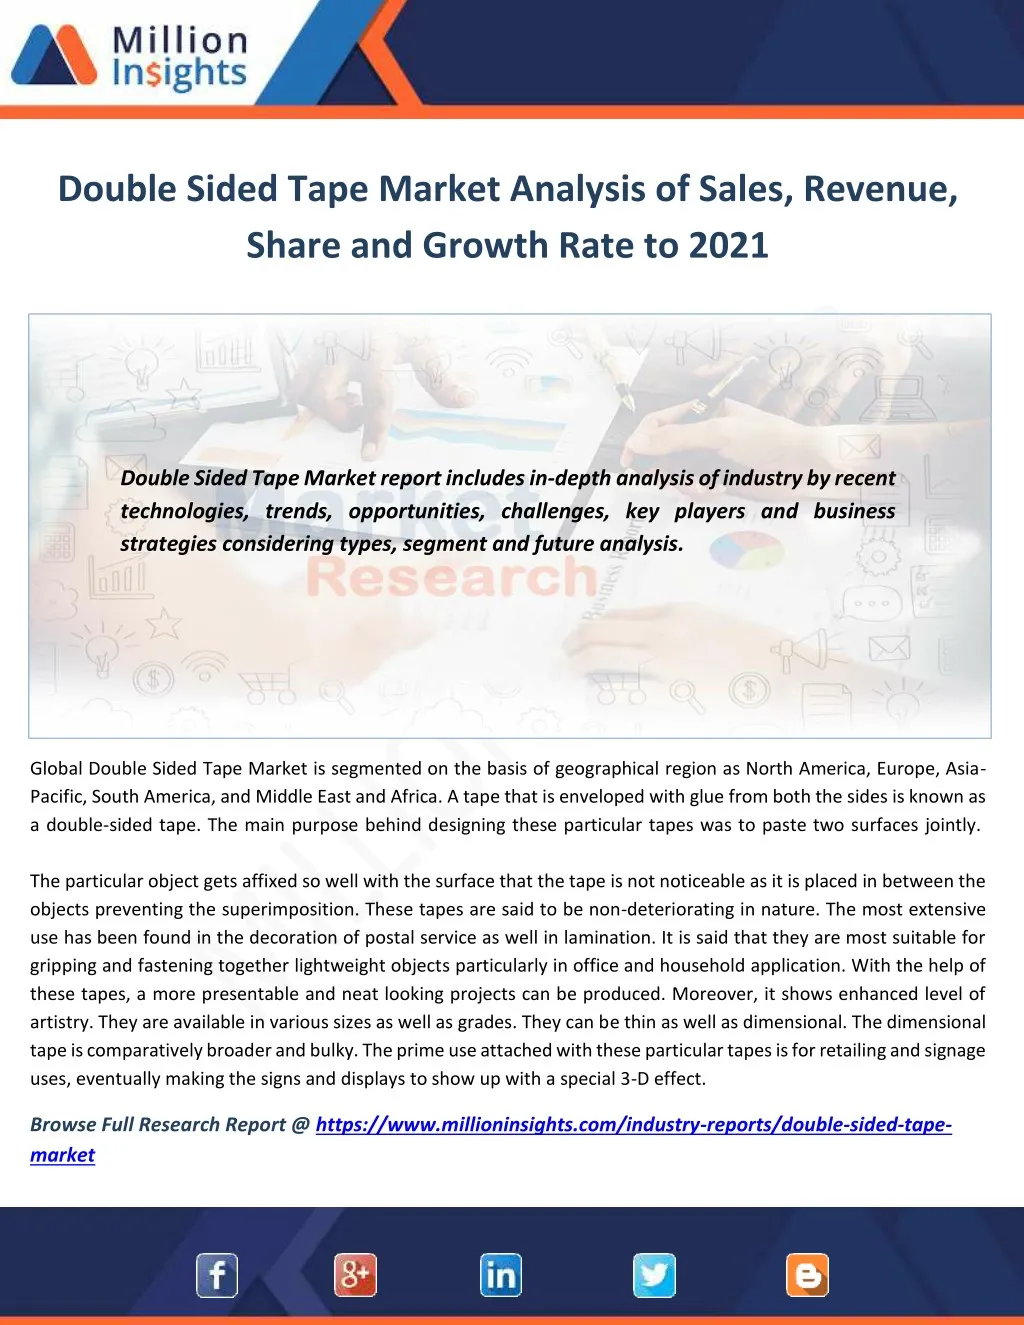 double sided tape market analysis of sales